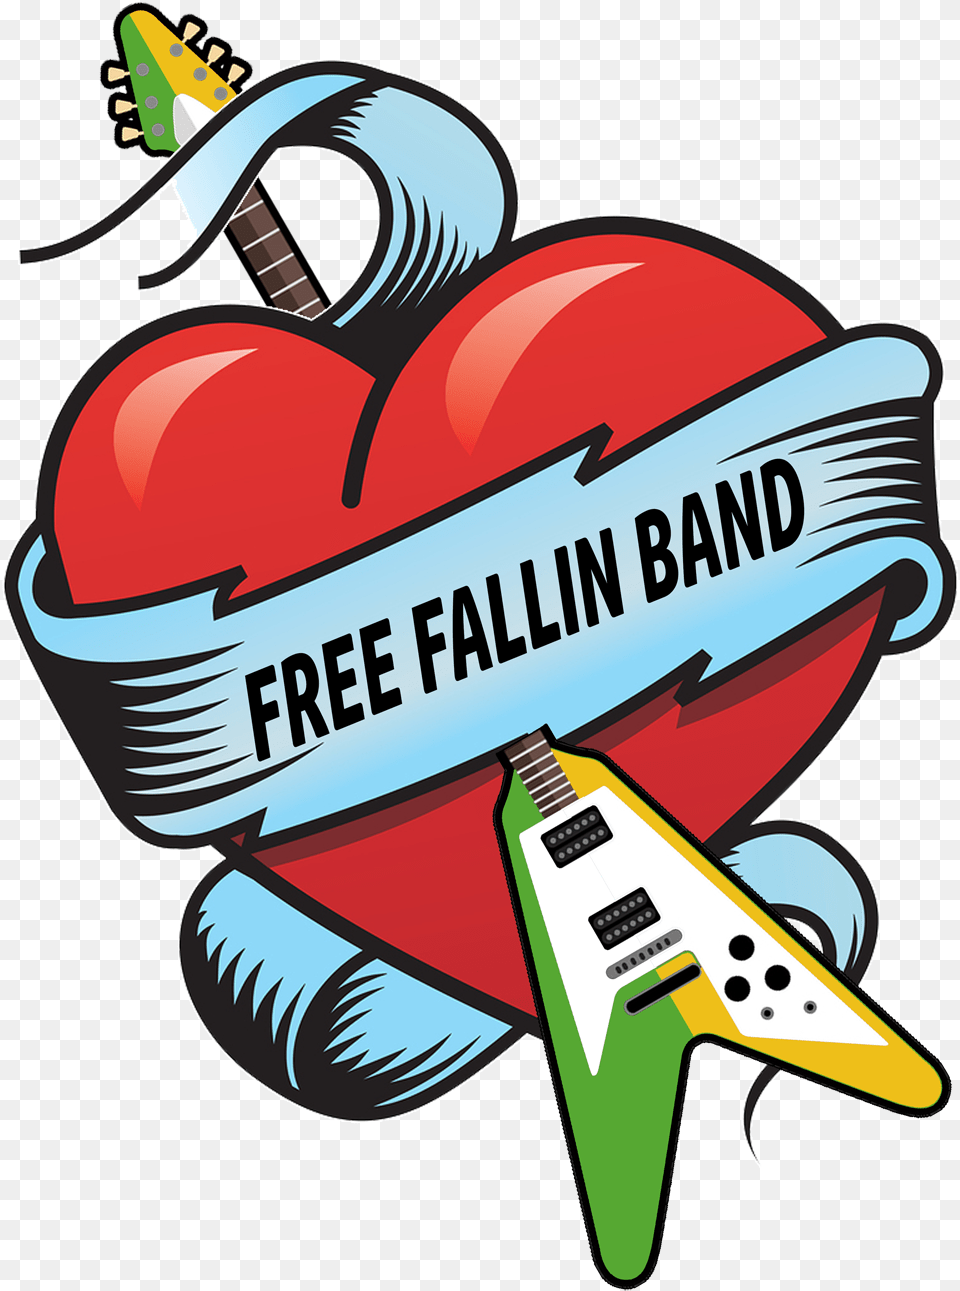 Free Fallin Band Heart With Ribbon Wrapping Around, Art, Graphics, Guitar, Musical Instrument Png